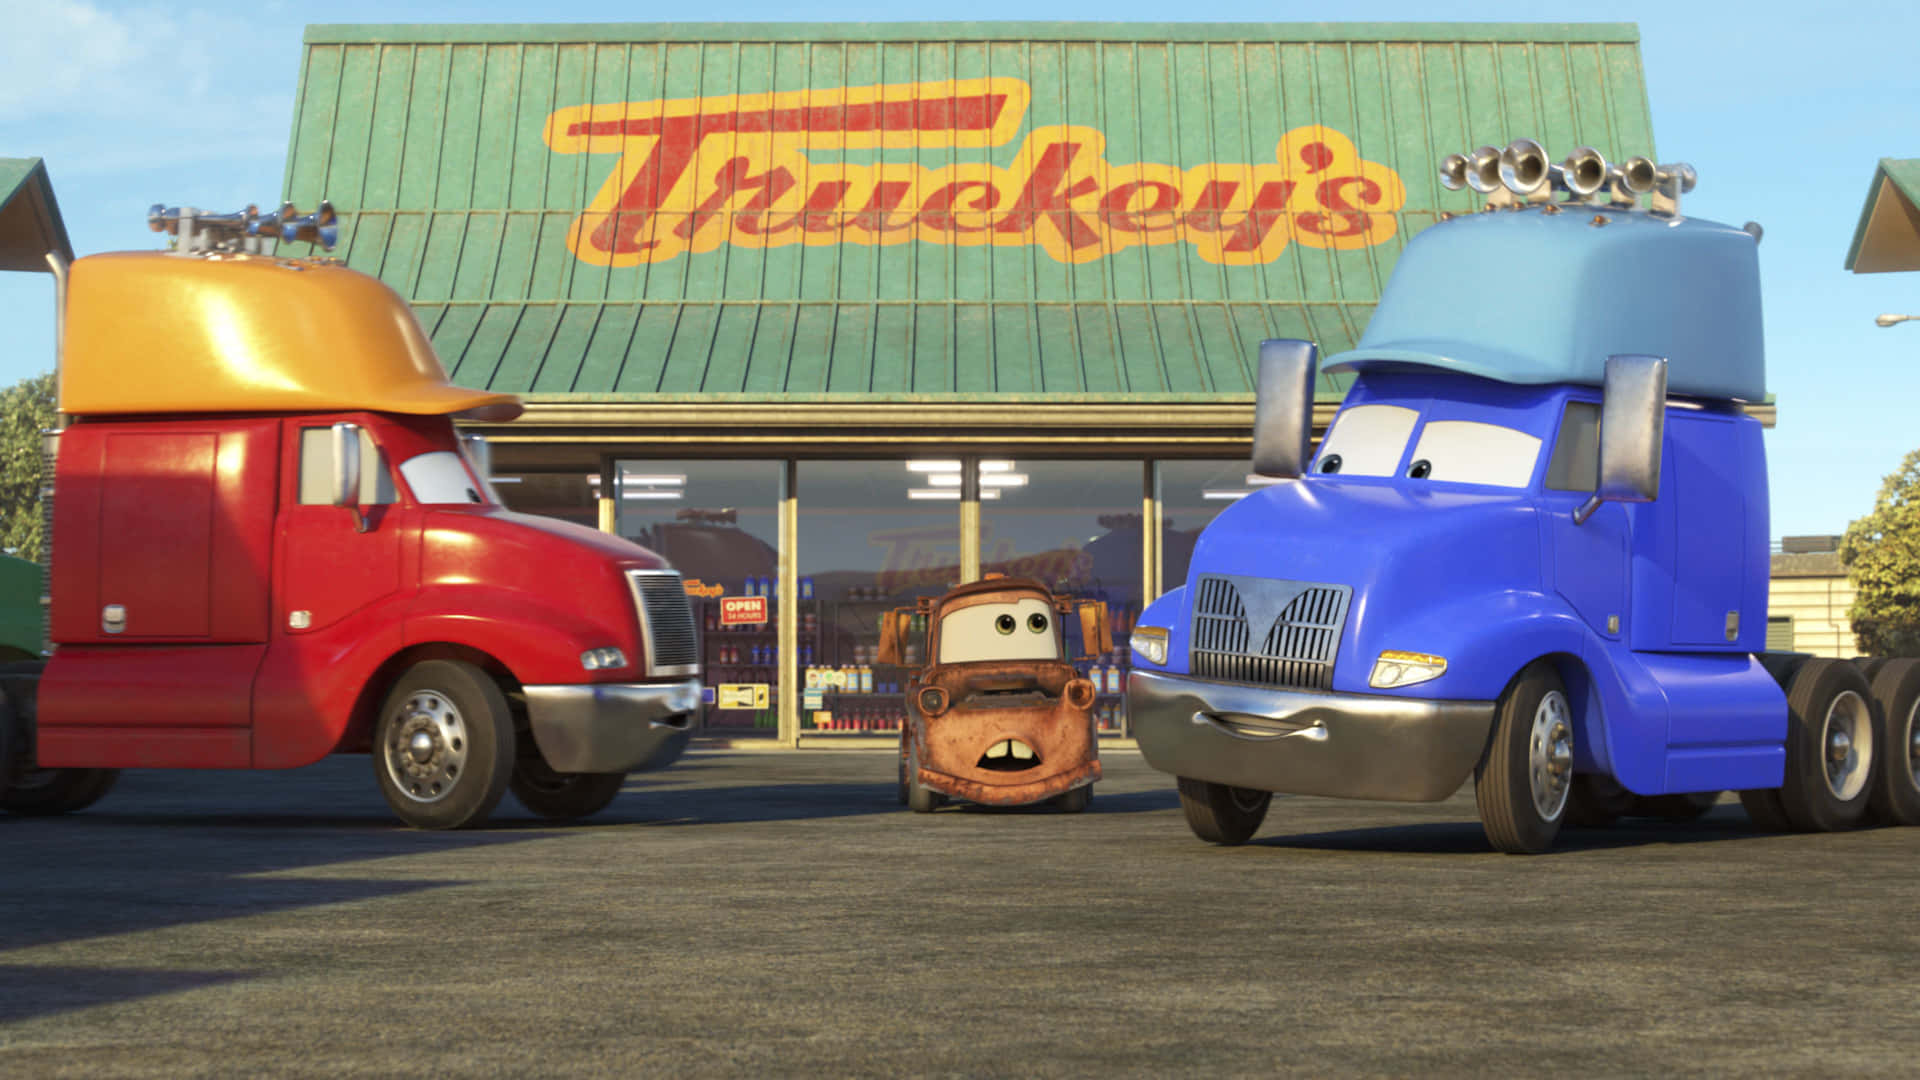 Lightning McQueen and Mater on an exciting adventure in Radiator Springs